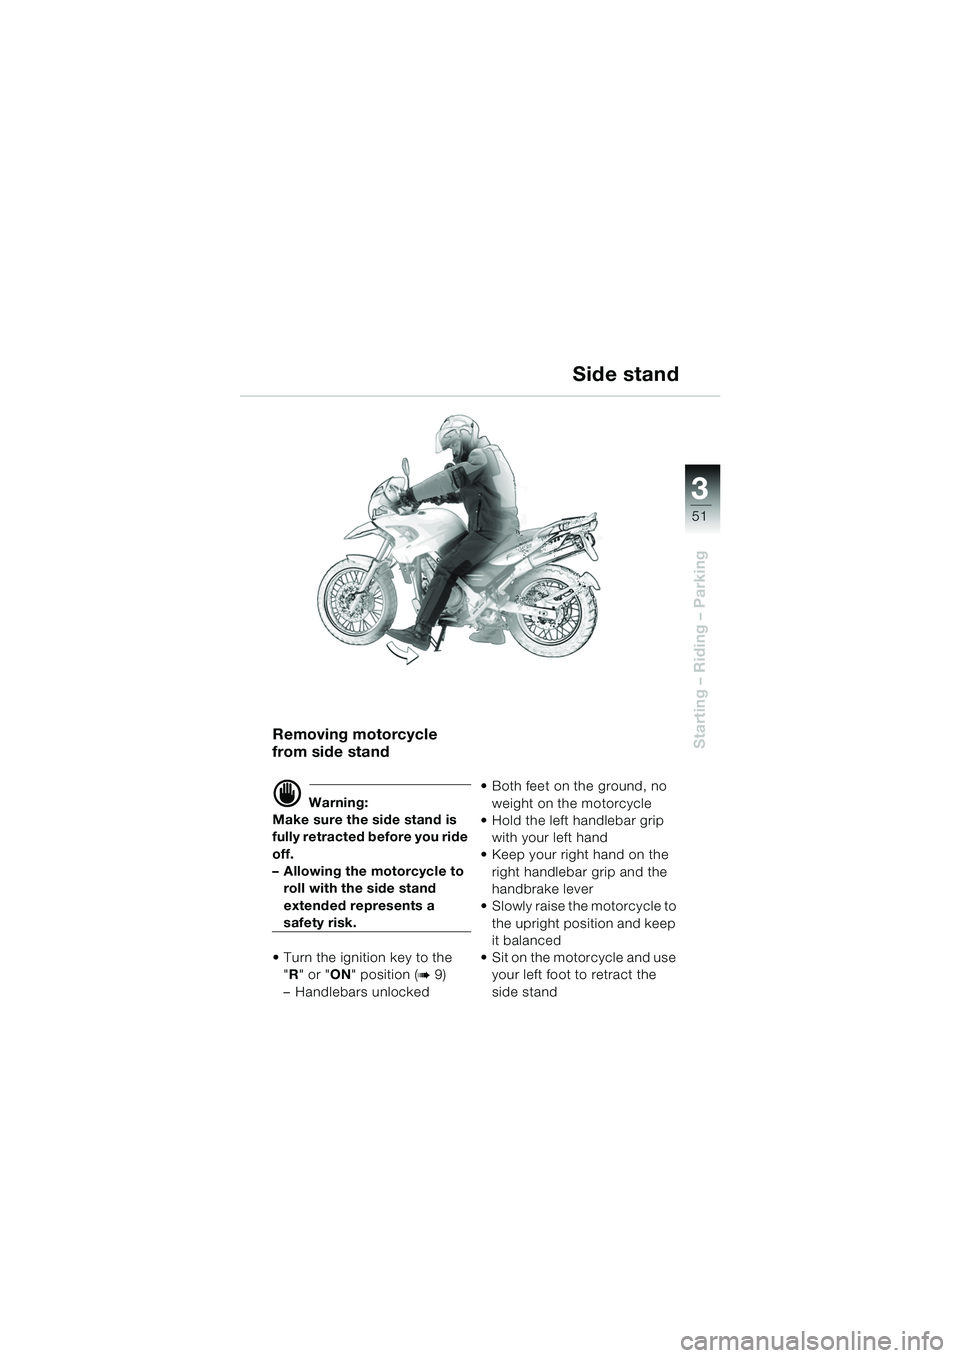 BMW MOTORRAD F 650 GS DAKAR 2003  Riders Manual (in English) 3
51
Starting – Riding – ParkingRemoving motorcycle 
from side stand
d Warning:
Make sure the side stand is 
fully retracted before you ride 
off.
– Allowing the motorcycle to  roll with the sid